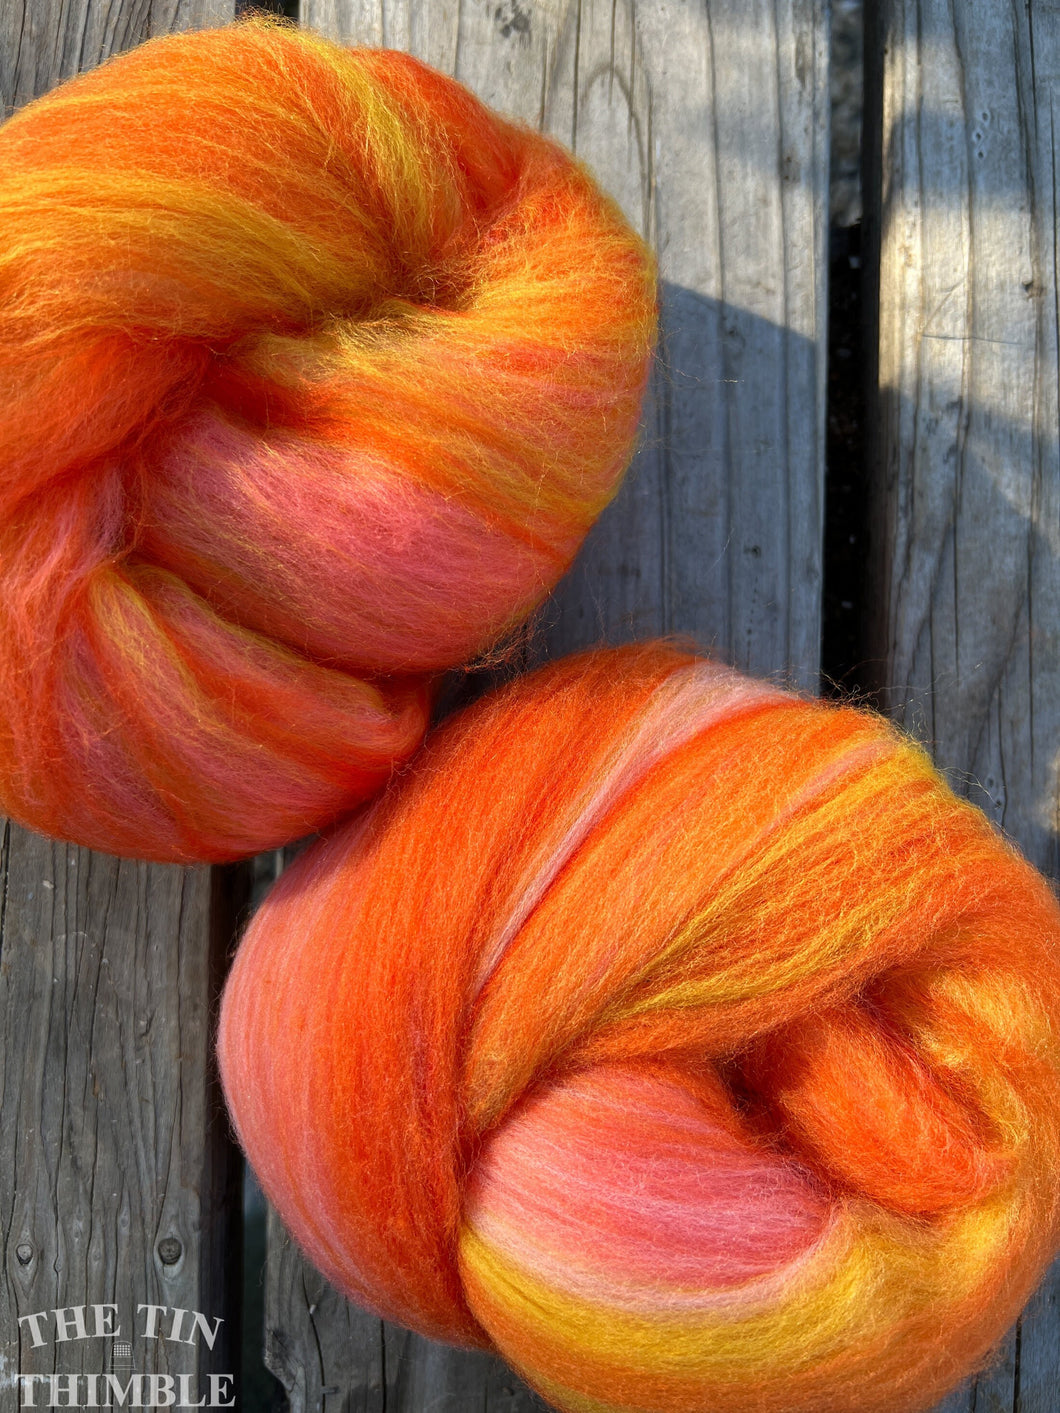 Hand Carded Batt for Felting or Spinning - Merino Blend - Hand Dyed and Commercially Dyed Fibers - Tropicana